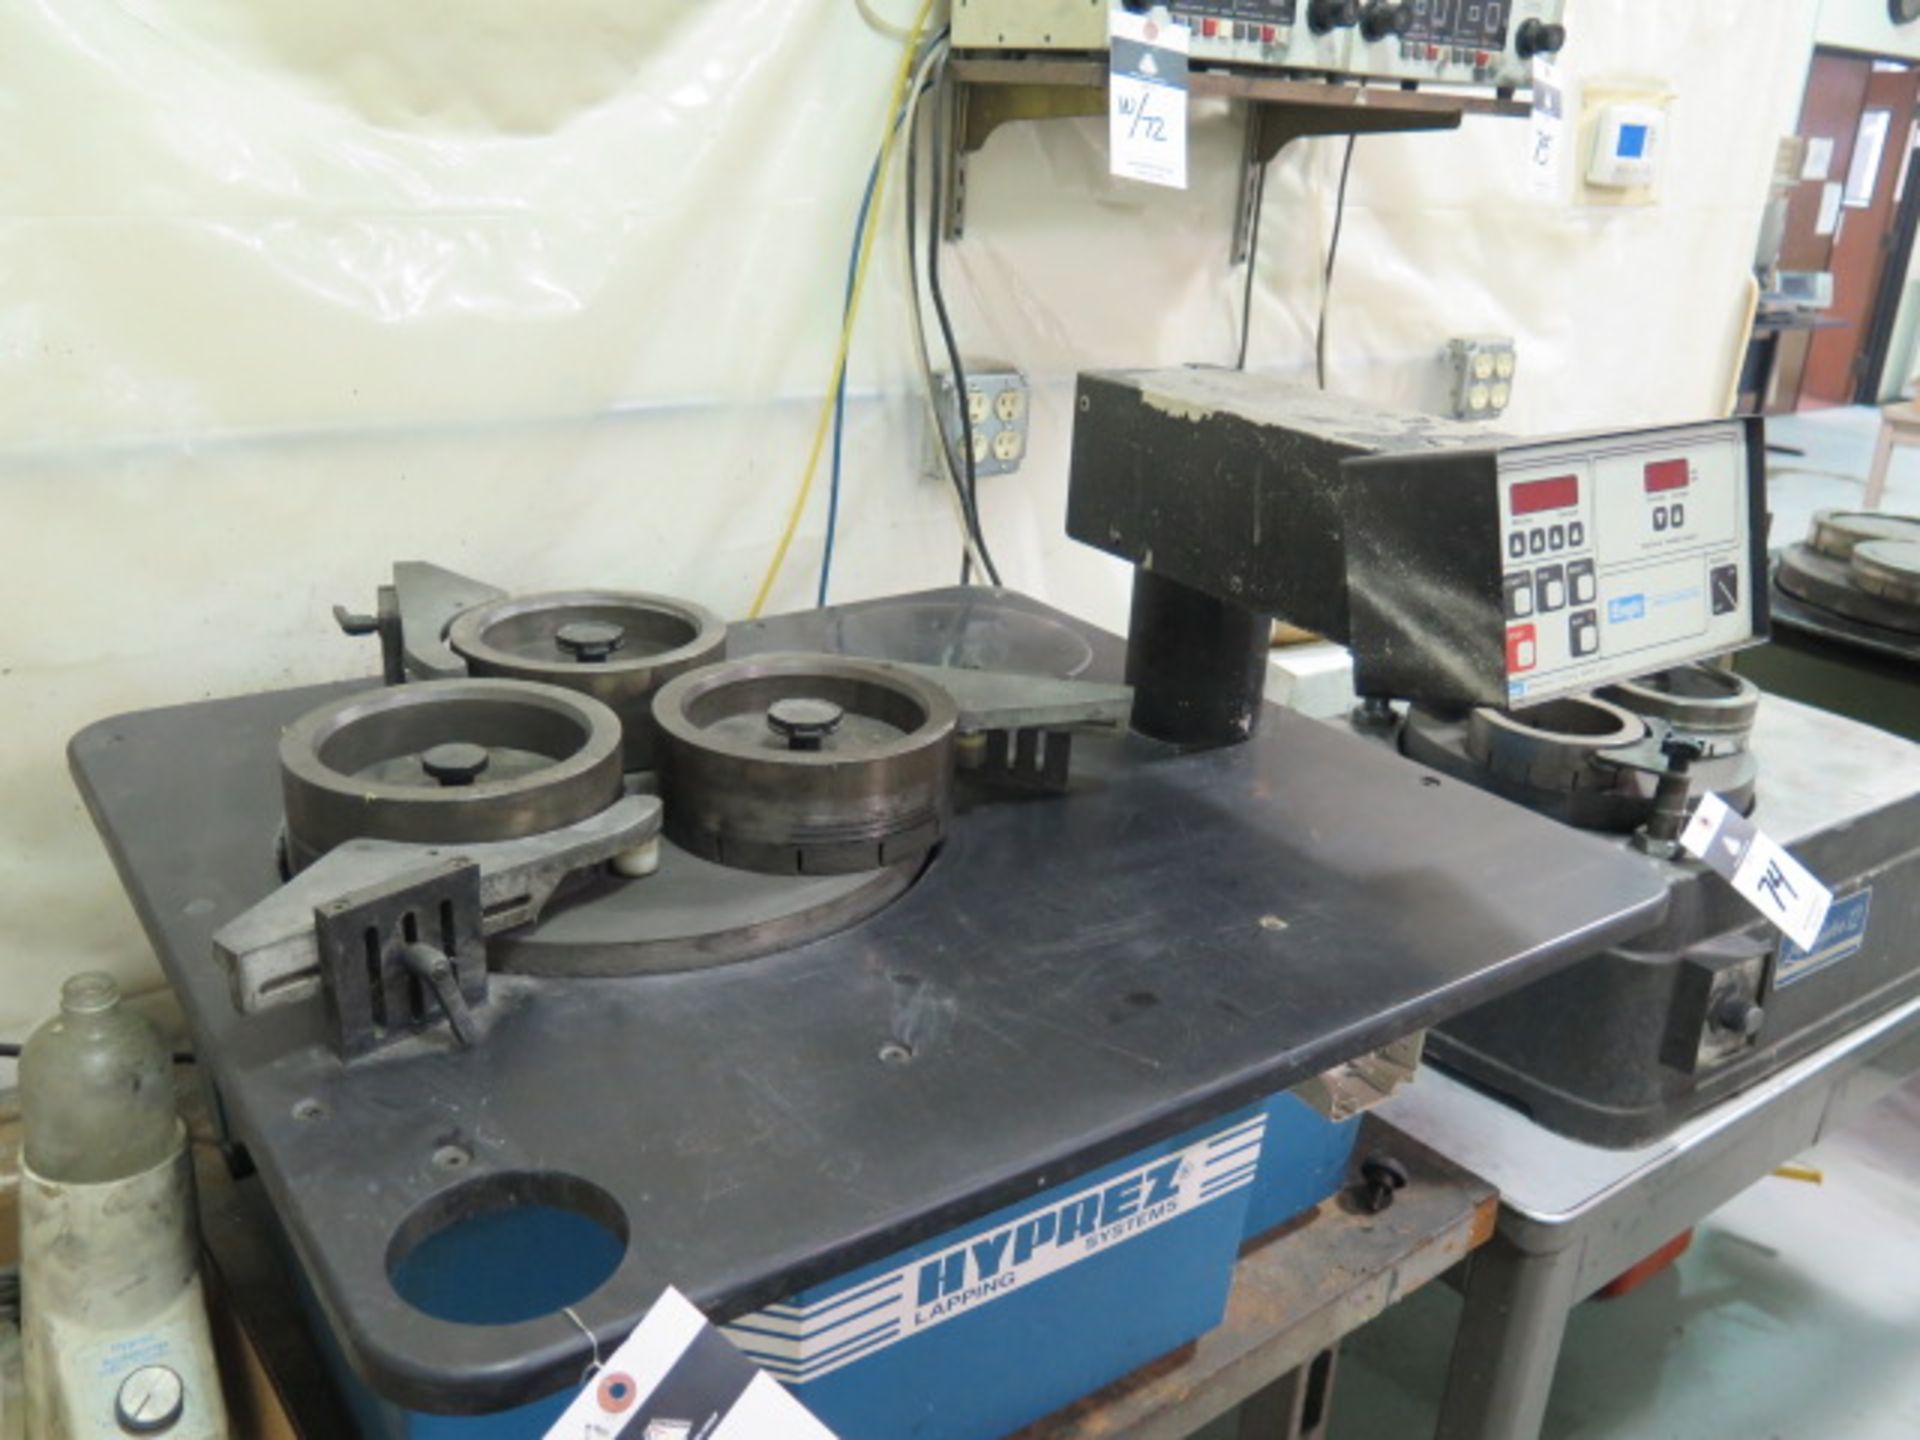 Engis Corp “Hyprex Lapping System” s/n 726LM15 w/ Engis Digital Controls, 15” Lapping Plate, - Image 2 of 10